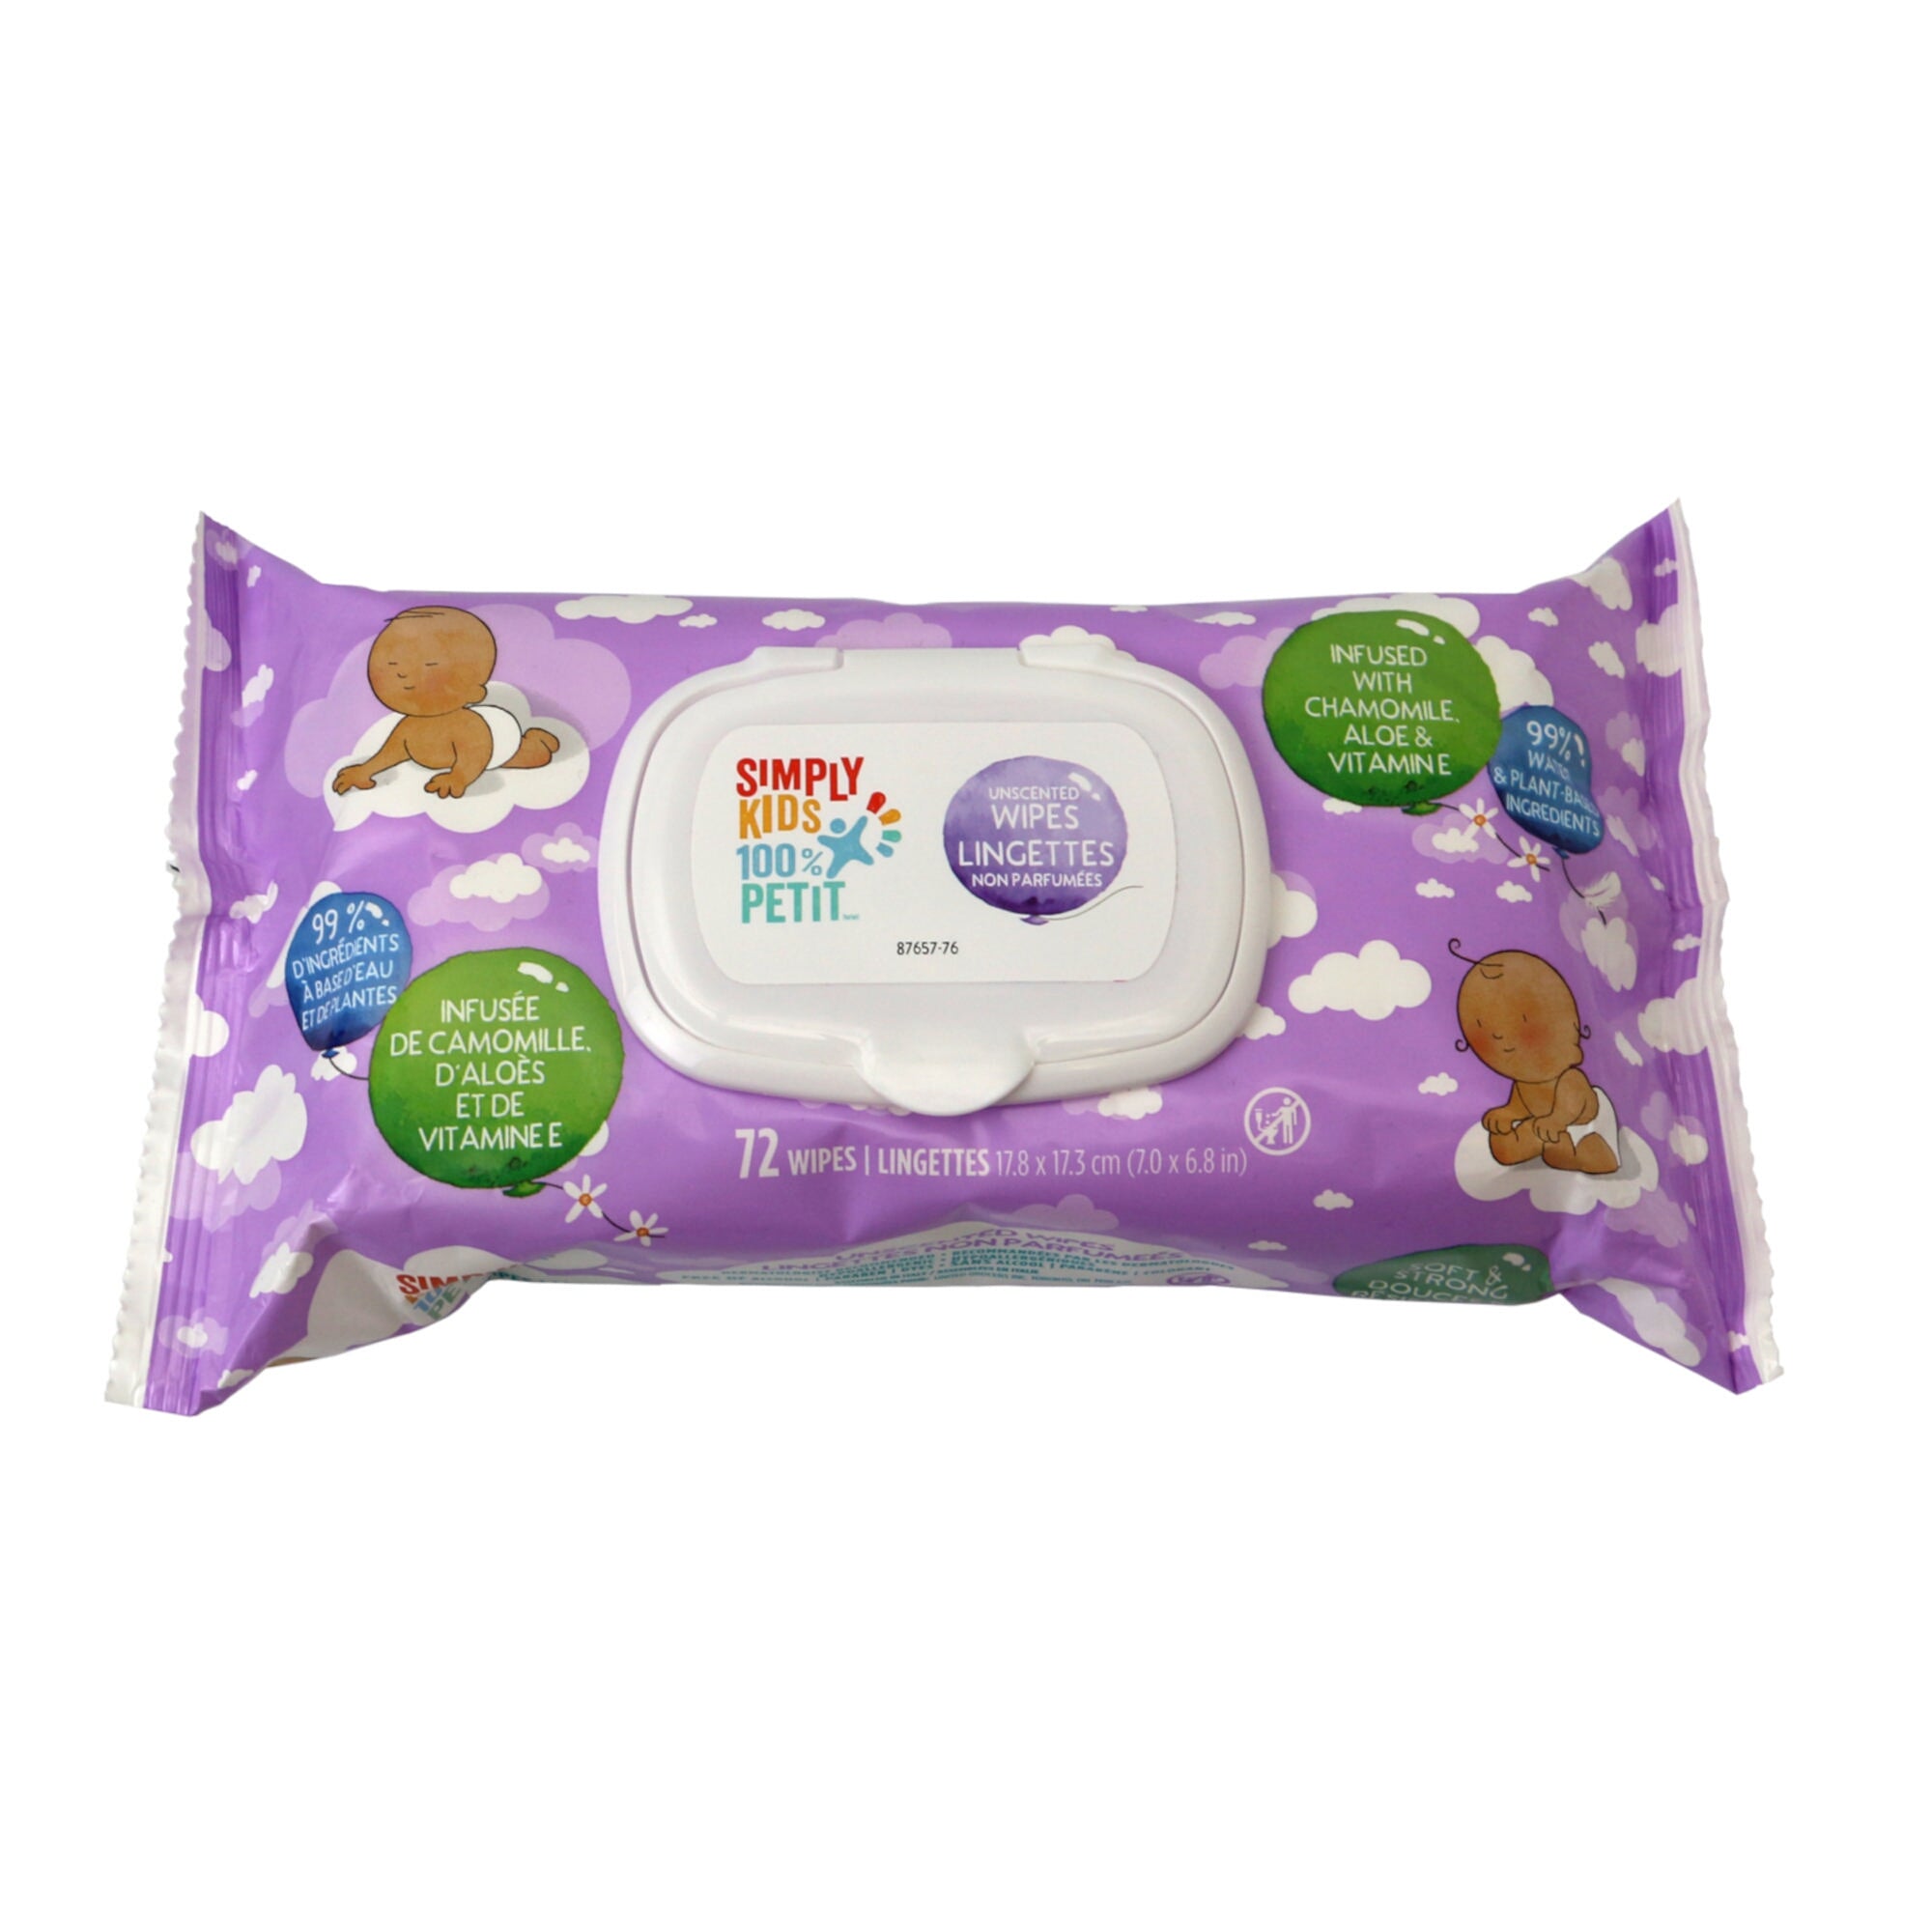 Simply Kids Unscented Wipes - 432pk.